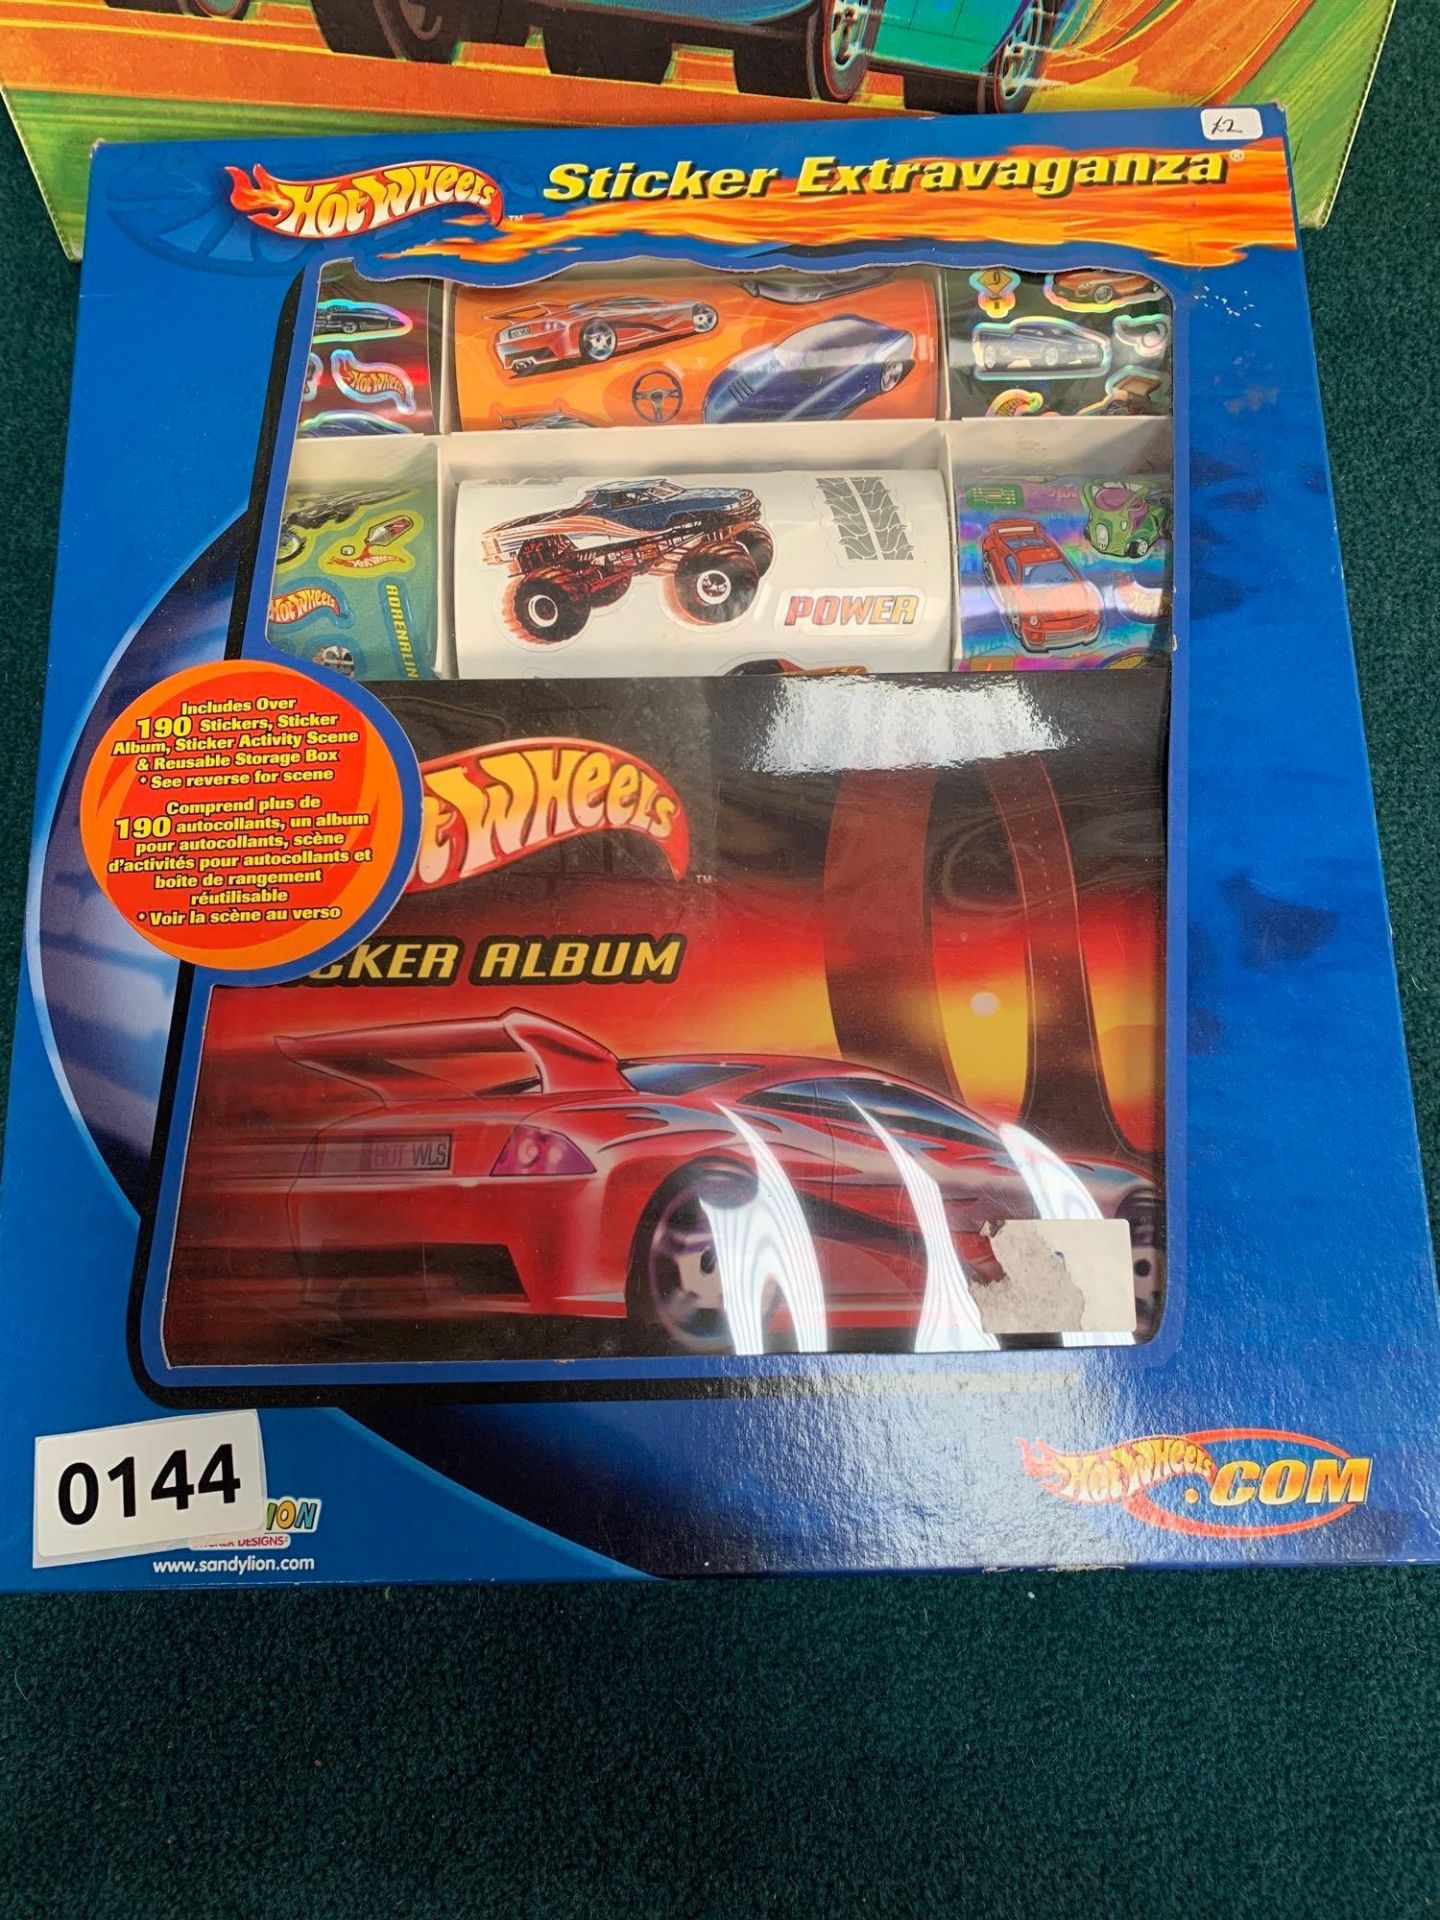 Hot Wheels Sticker Album With 2 X Carry Playset Cases - Image 3 of 9